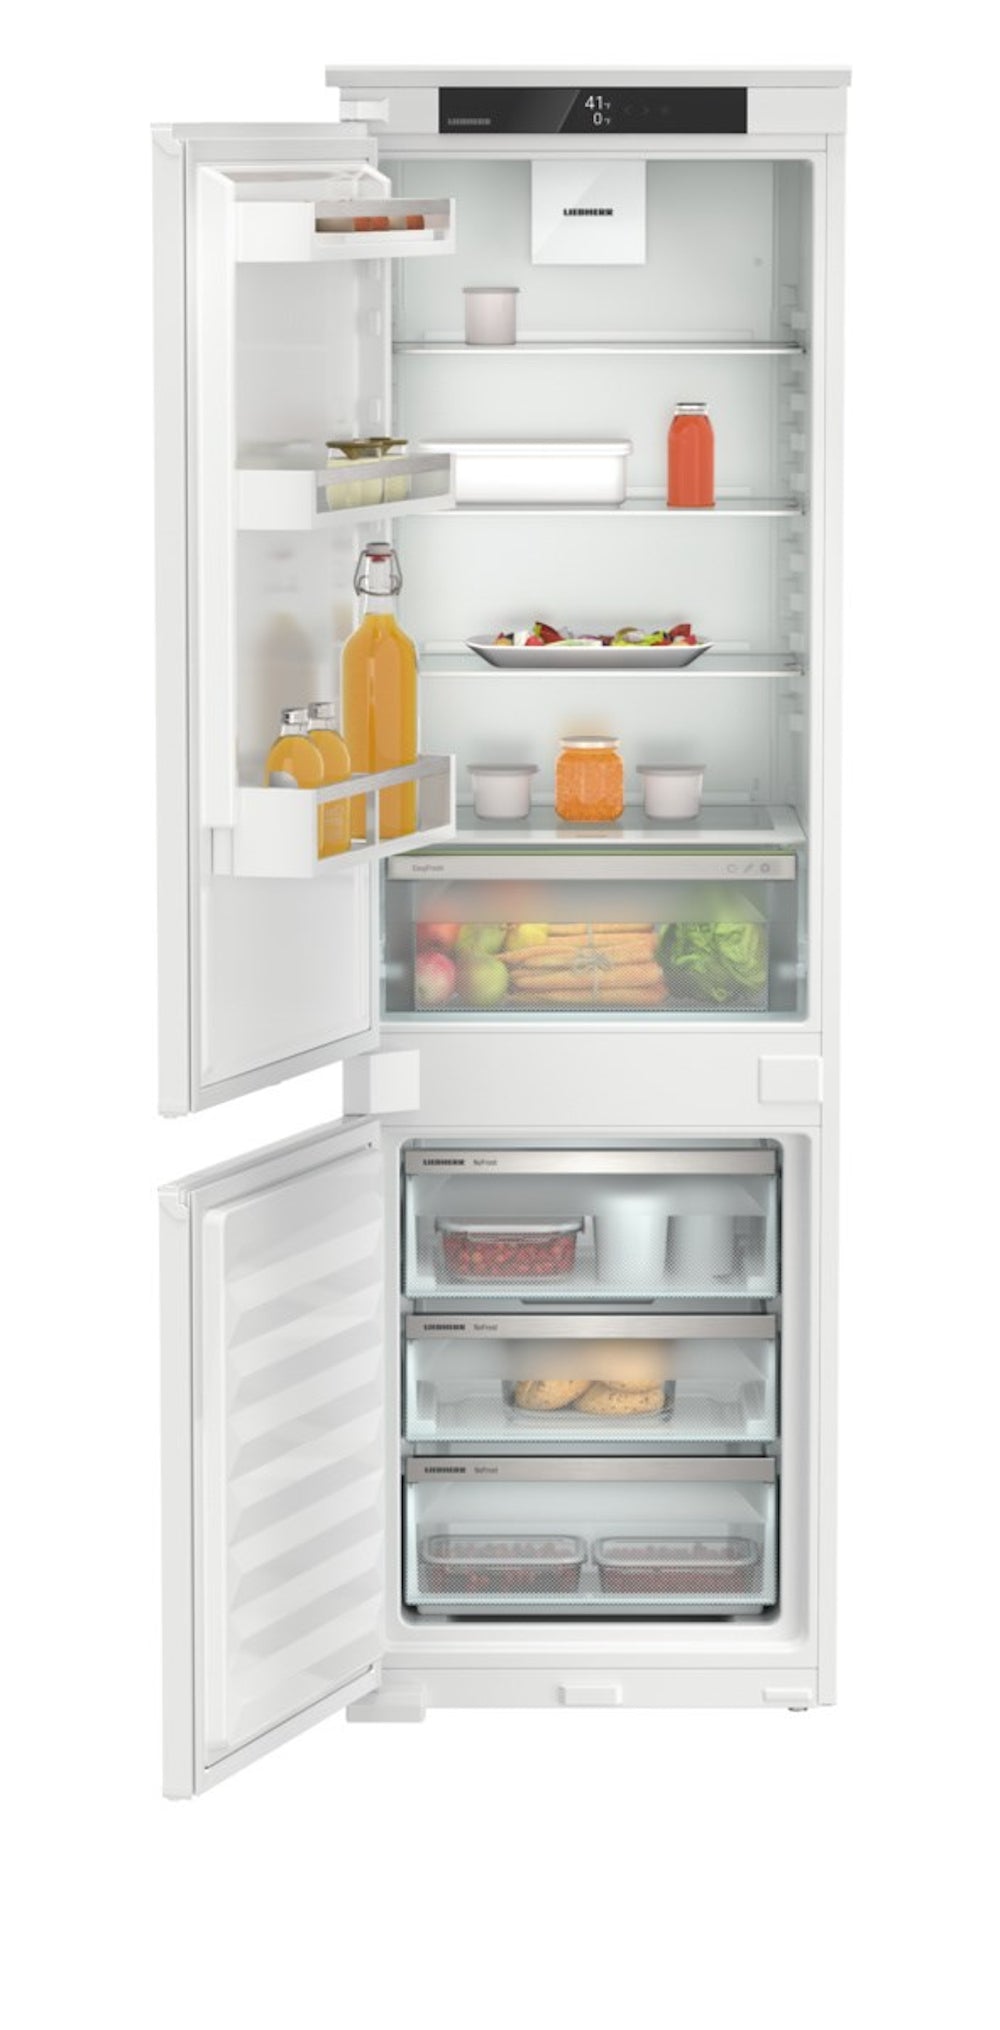 Liebherr - 21.5 Inch 8.9 cu. ft Built In / Integrated Refrigerator in Panel Ready - ICS5101